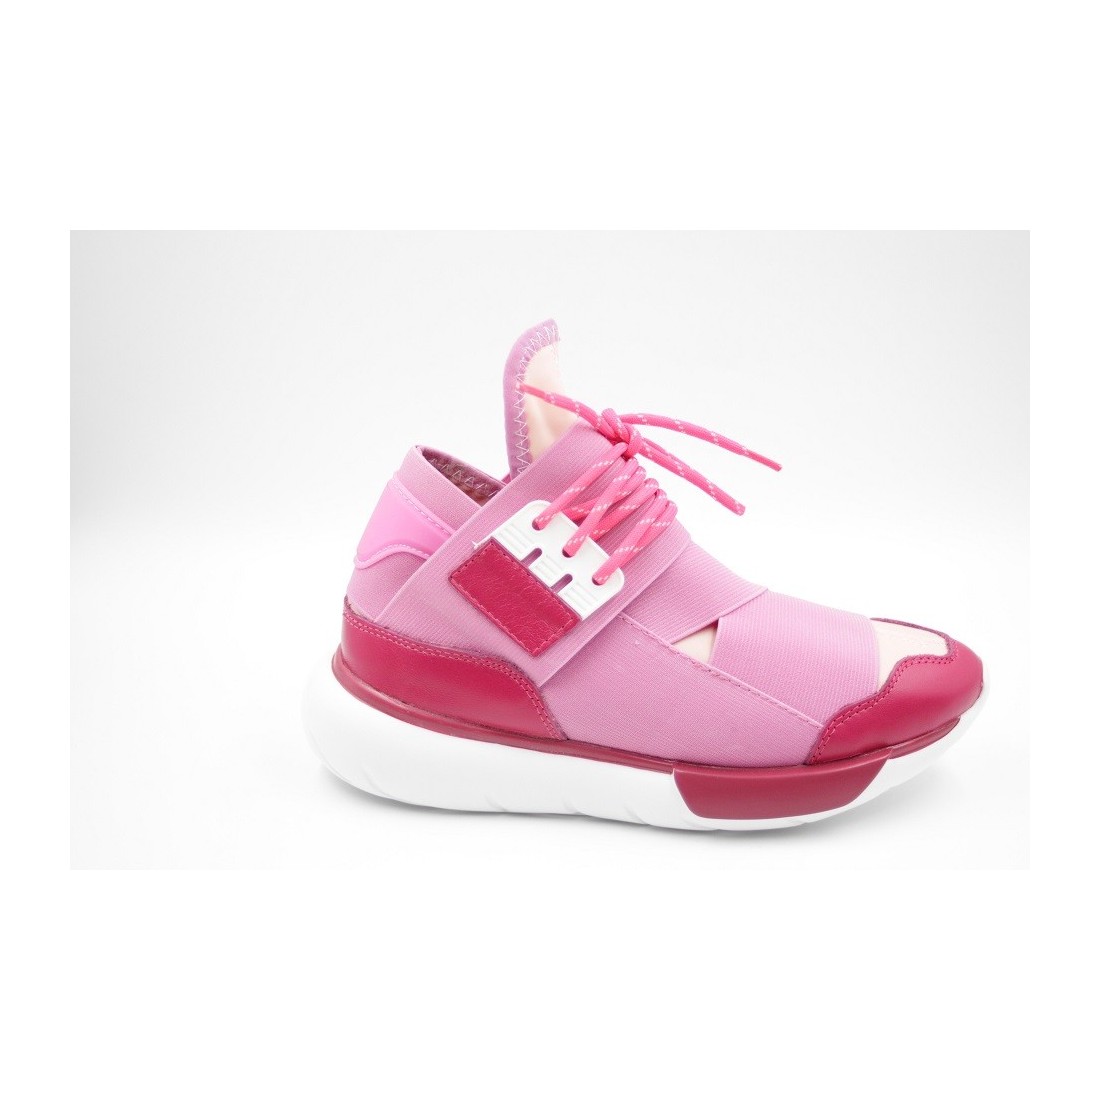 Sneakers fashion pink mania